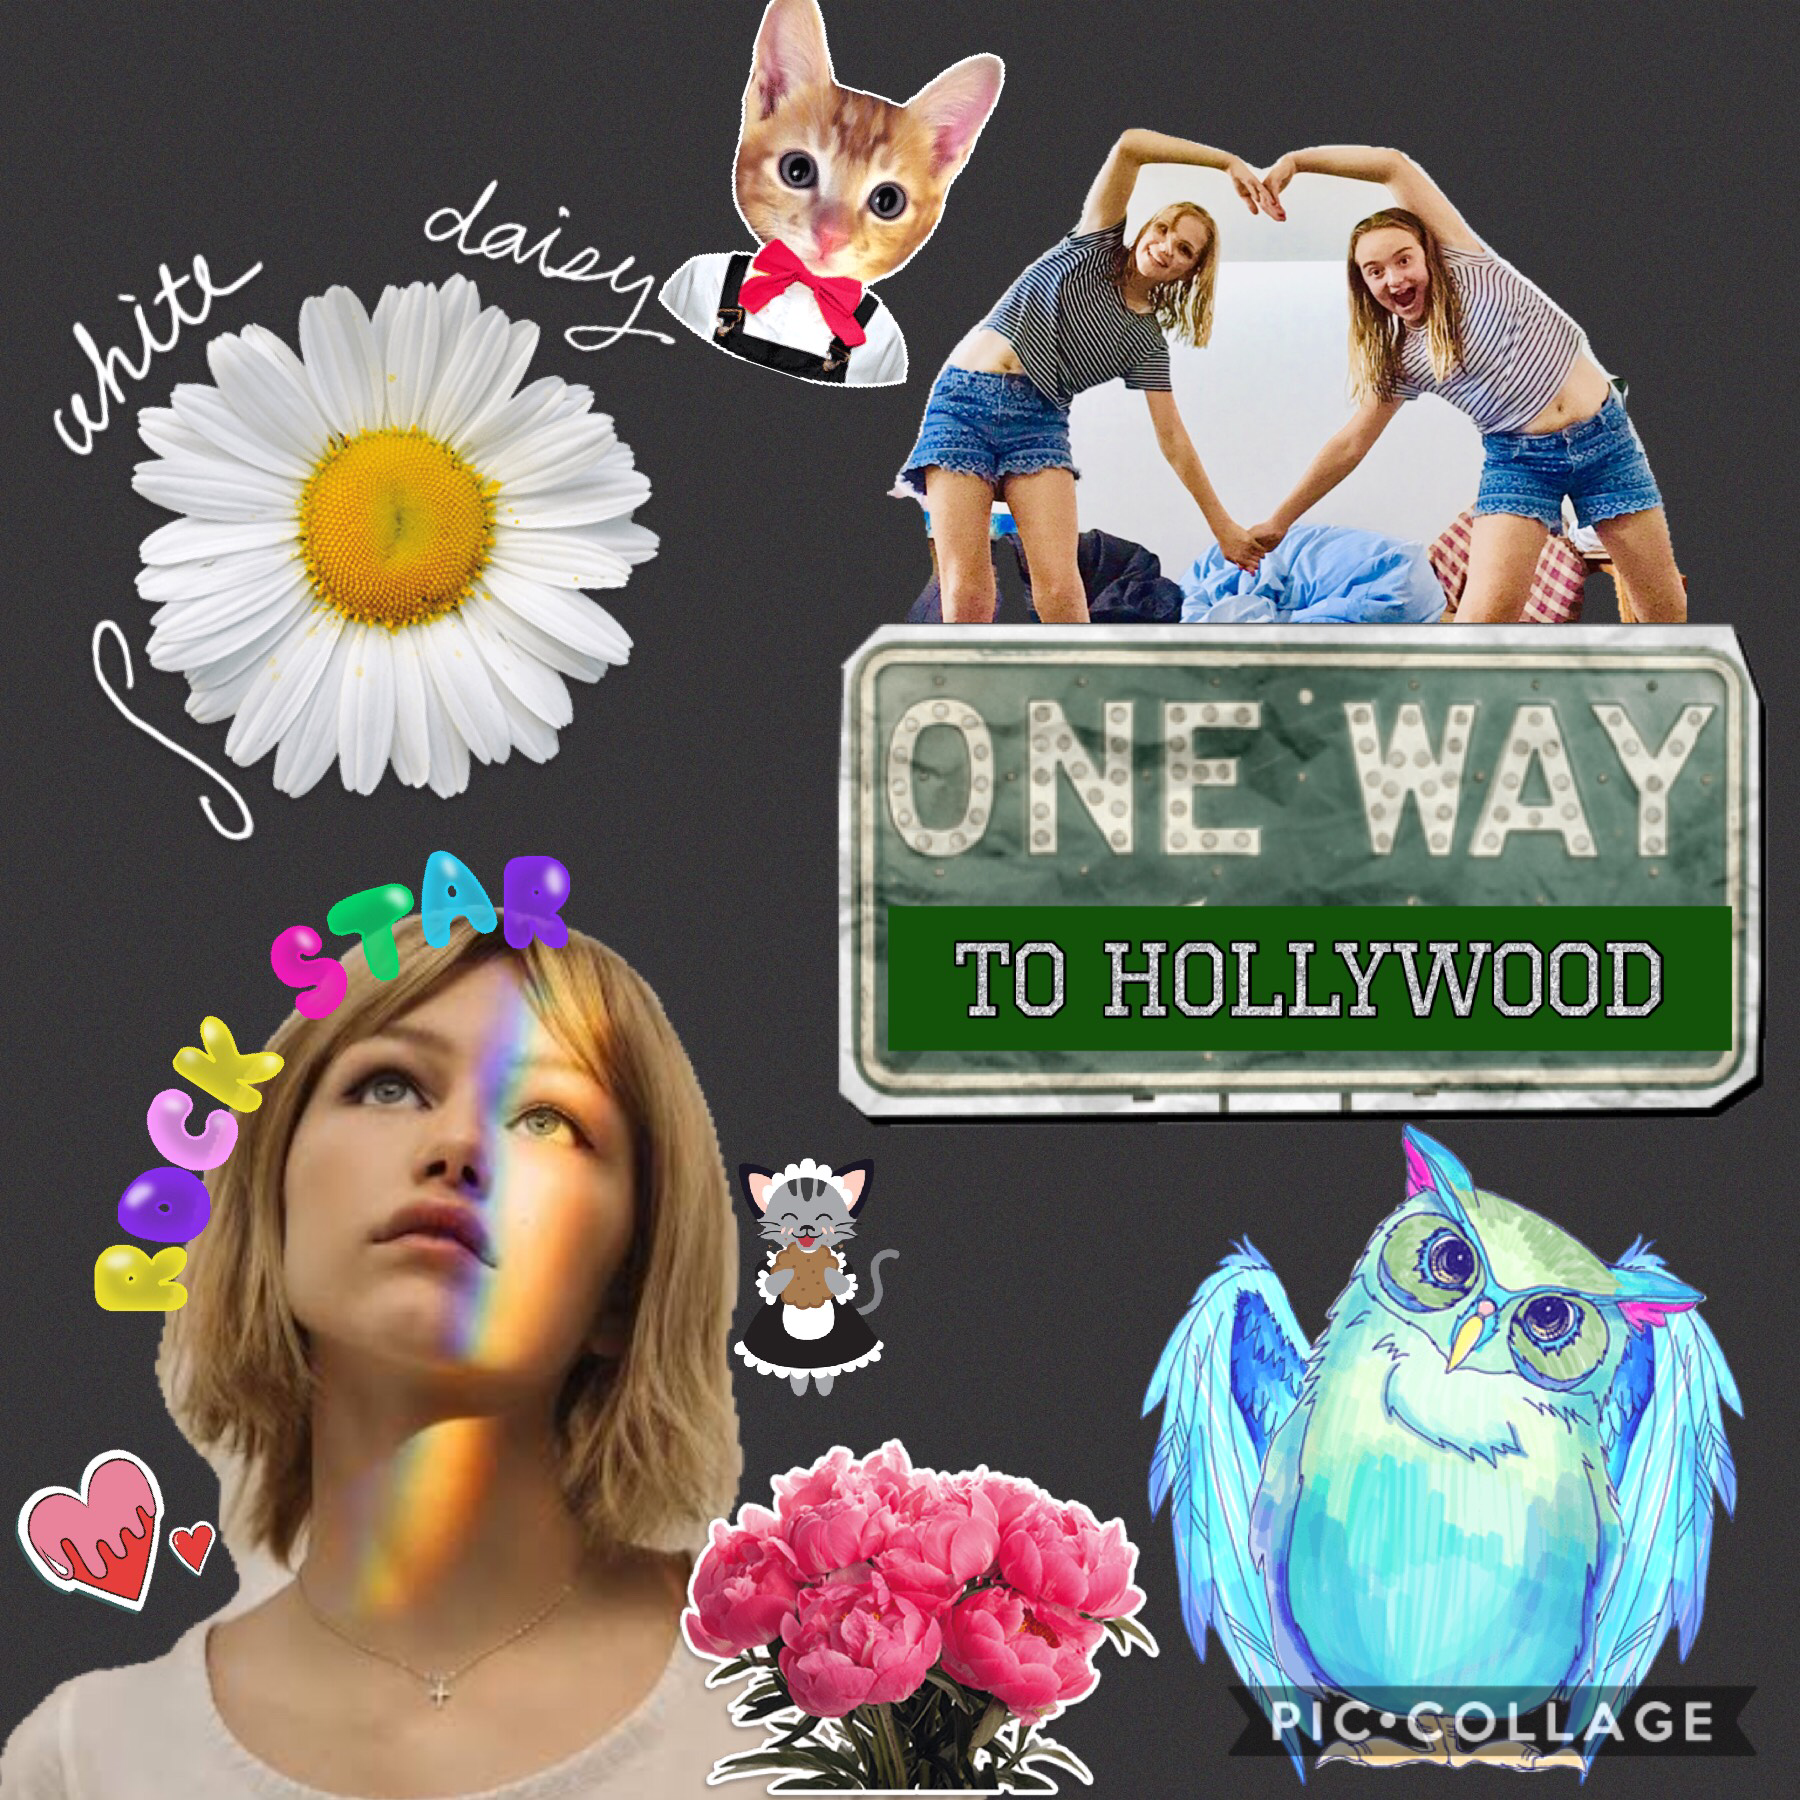 Collage by lucy192837465